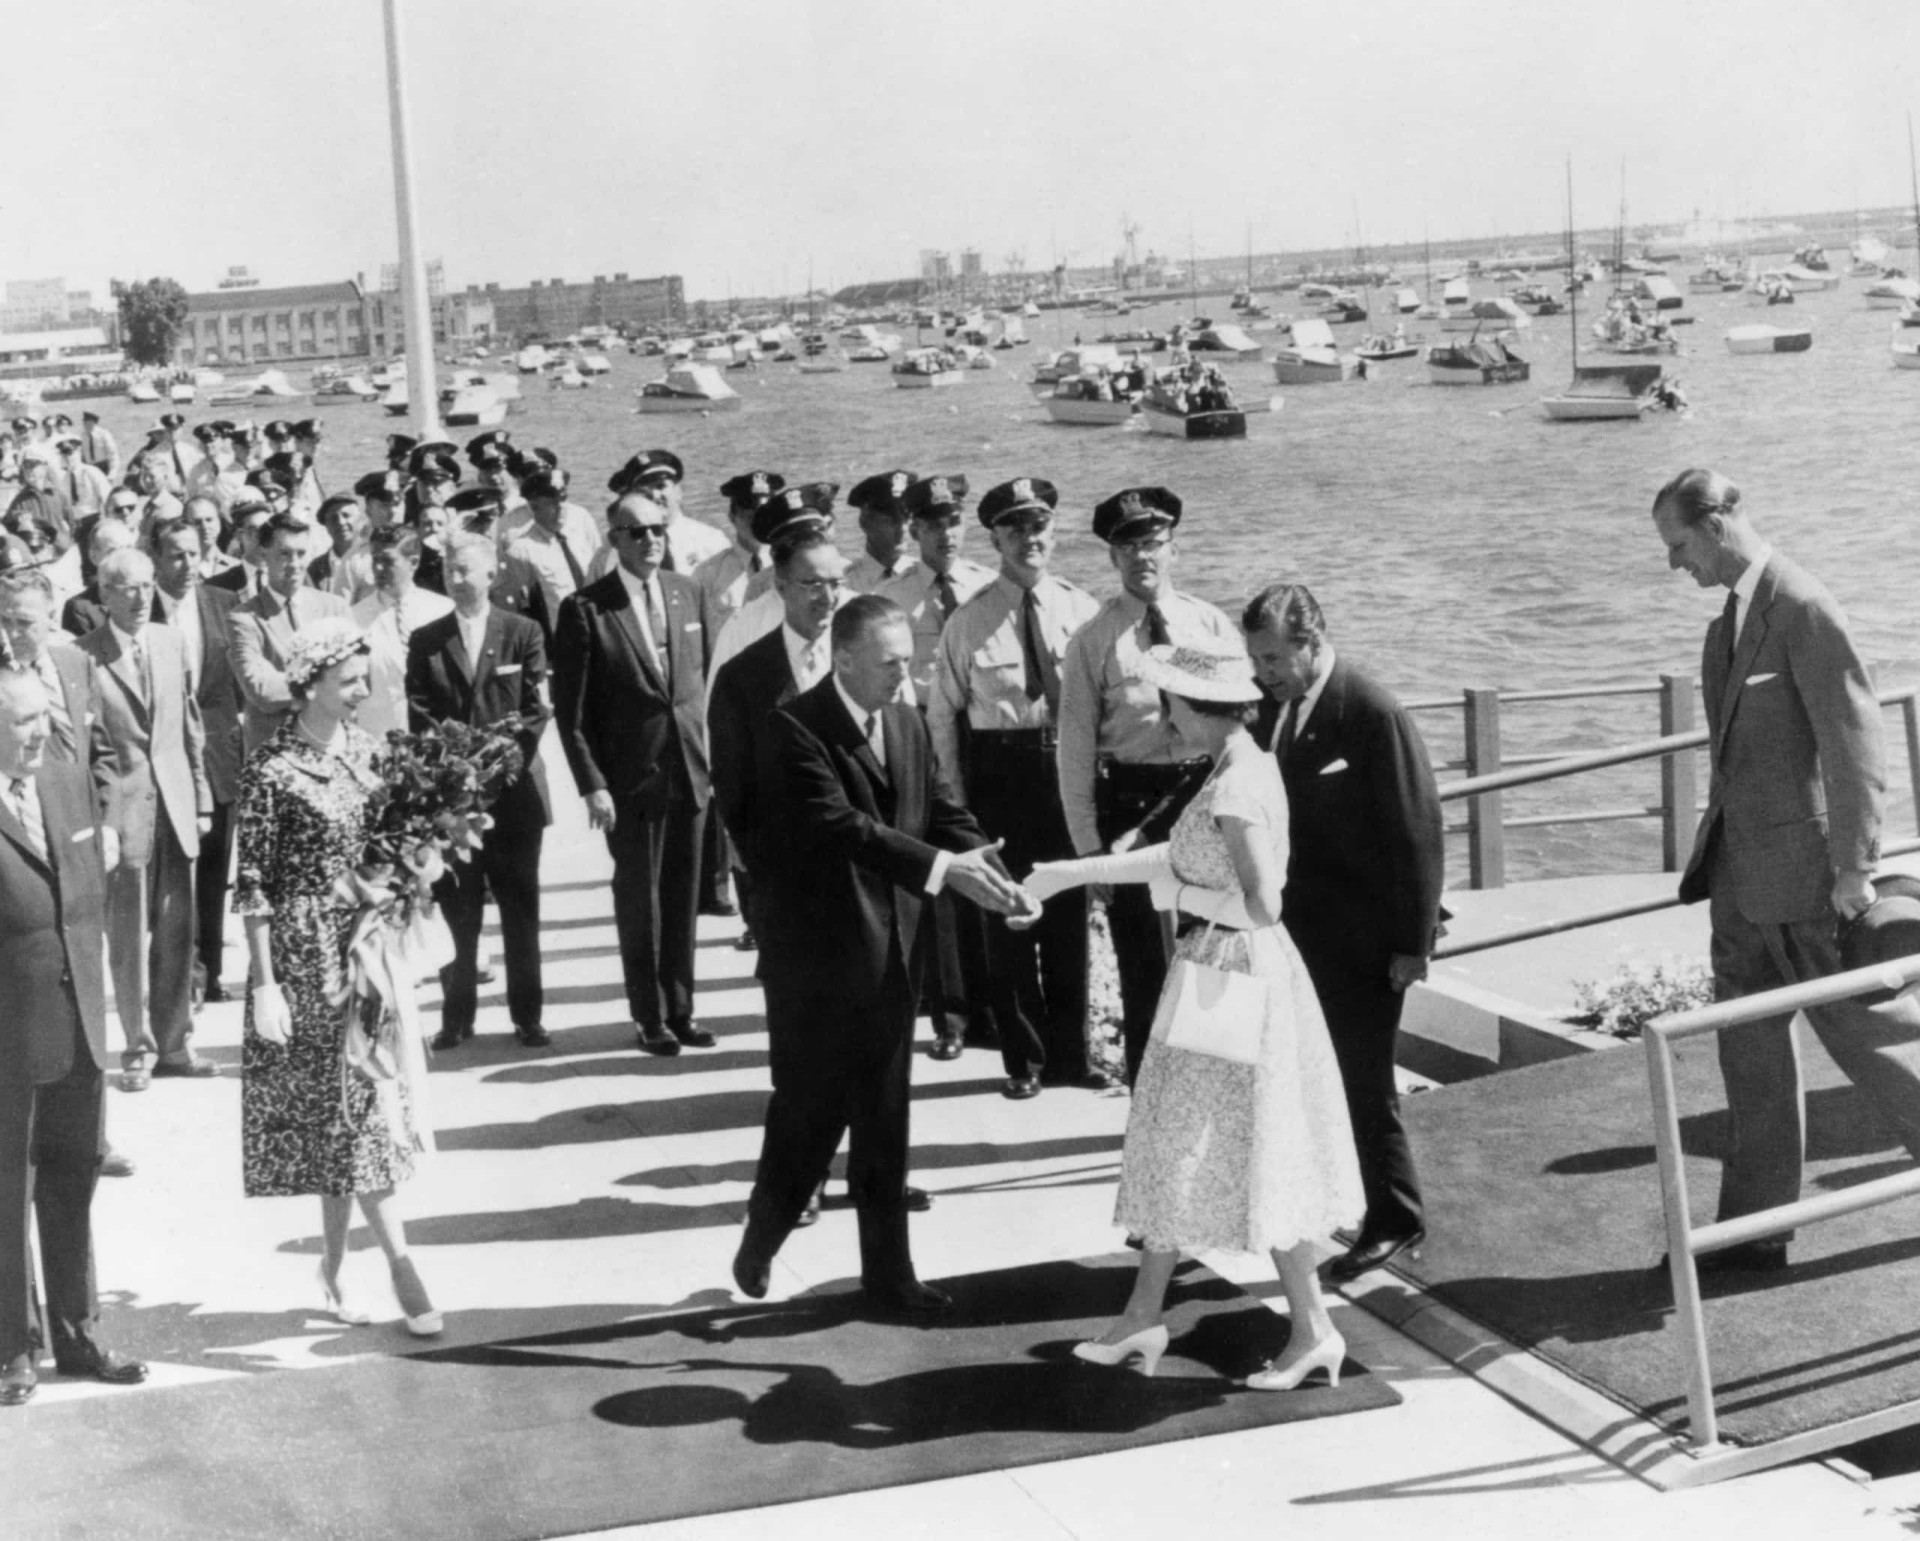 <p>Chicago's July 1959 royal welcome for the Queen and the Duke of Edinburgh was overwhelming. Some 6,000 vessels of all sizes jammed the harbor area to greet <em>Britannia</em> after having sailed the newly opened St. Lawrence Seaway. Queen Elizabeth, the first British monarch to visit Chicago, is pictured being welcomed by Illinois Governor William Straton. US President Dwight D. Eisenhower had been a guest during part of the voyage, having been invited to take part in the opening ceremony of the St. Lawrence Seaway.</p><p><a href="https://www.msn.com/en-ph/community/channel/vid-7xx8mnucu55yw63we9va2gwr7uihbxwc68fxqp25x6tg4ftibpra?cvid=94631541bc0f4f89bfd59158d696ad7e">Follow us and access great exclusive content every day</a></p>